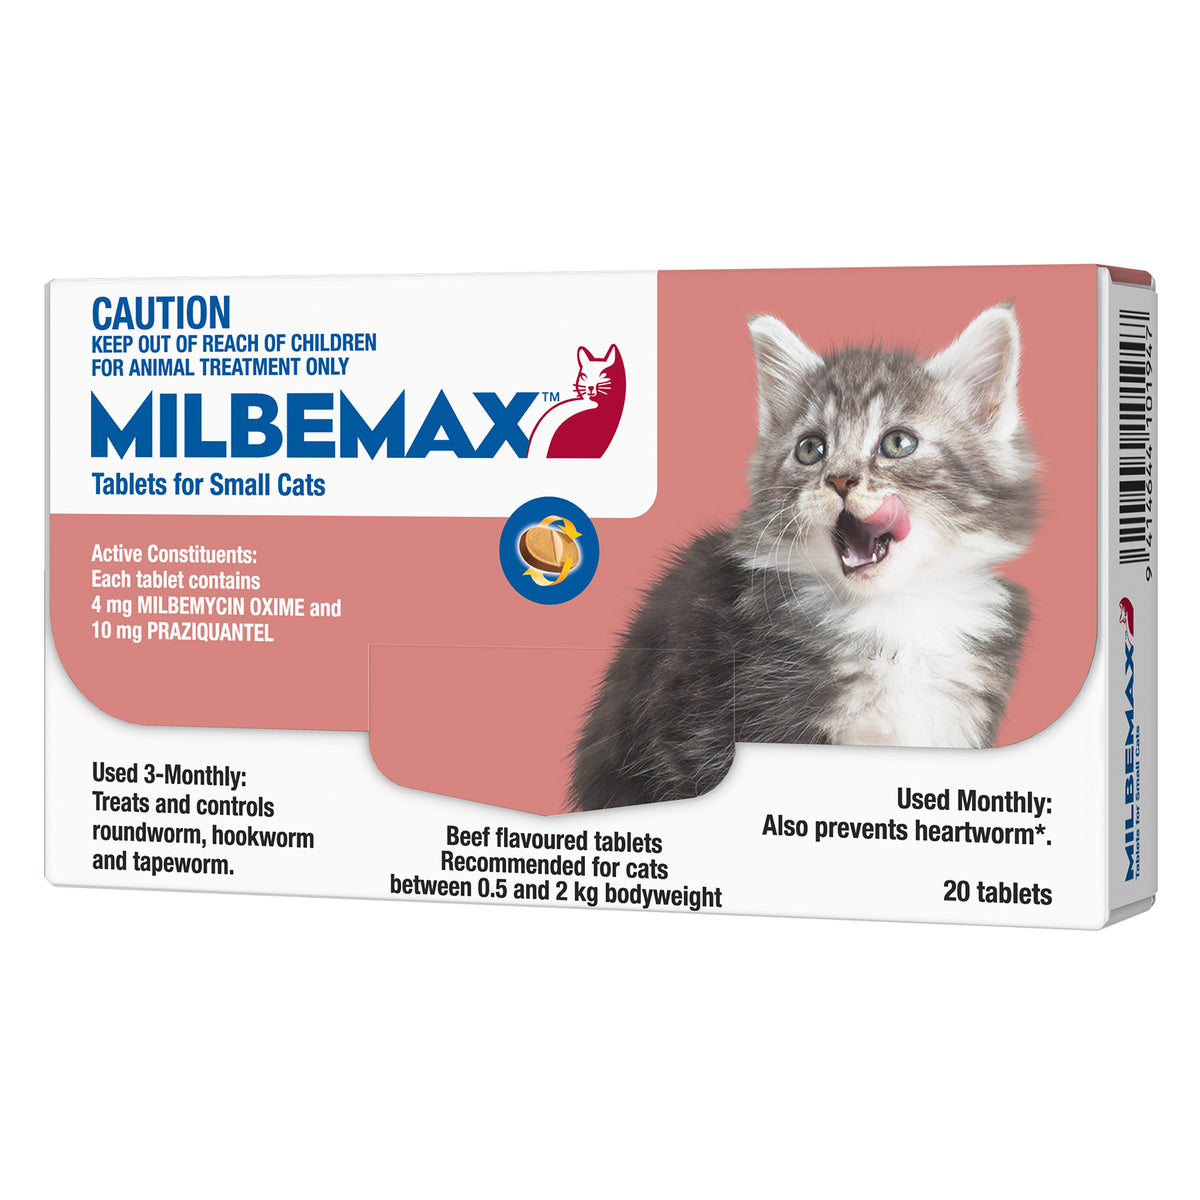 Milbemax Broad Spectrum Wormer for Cats